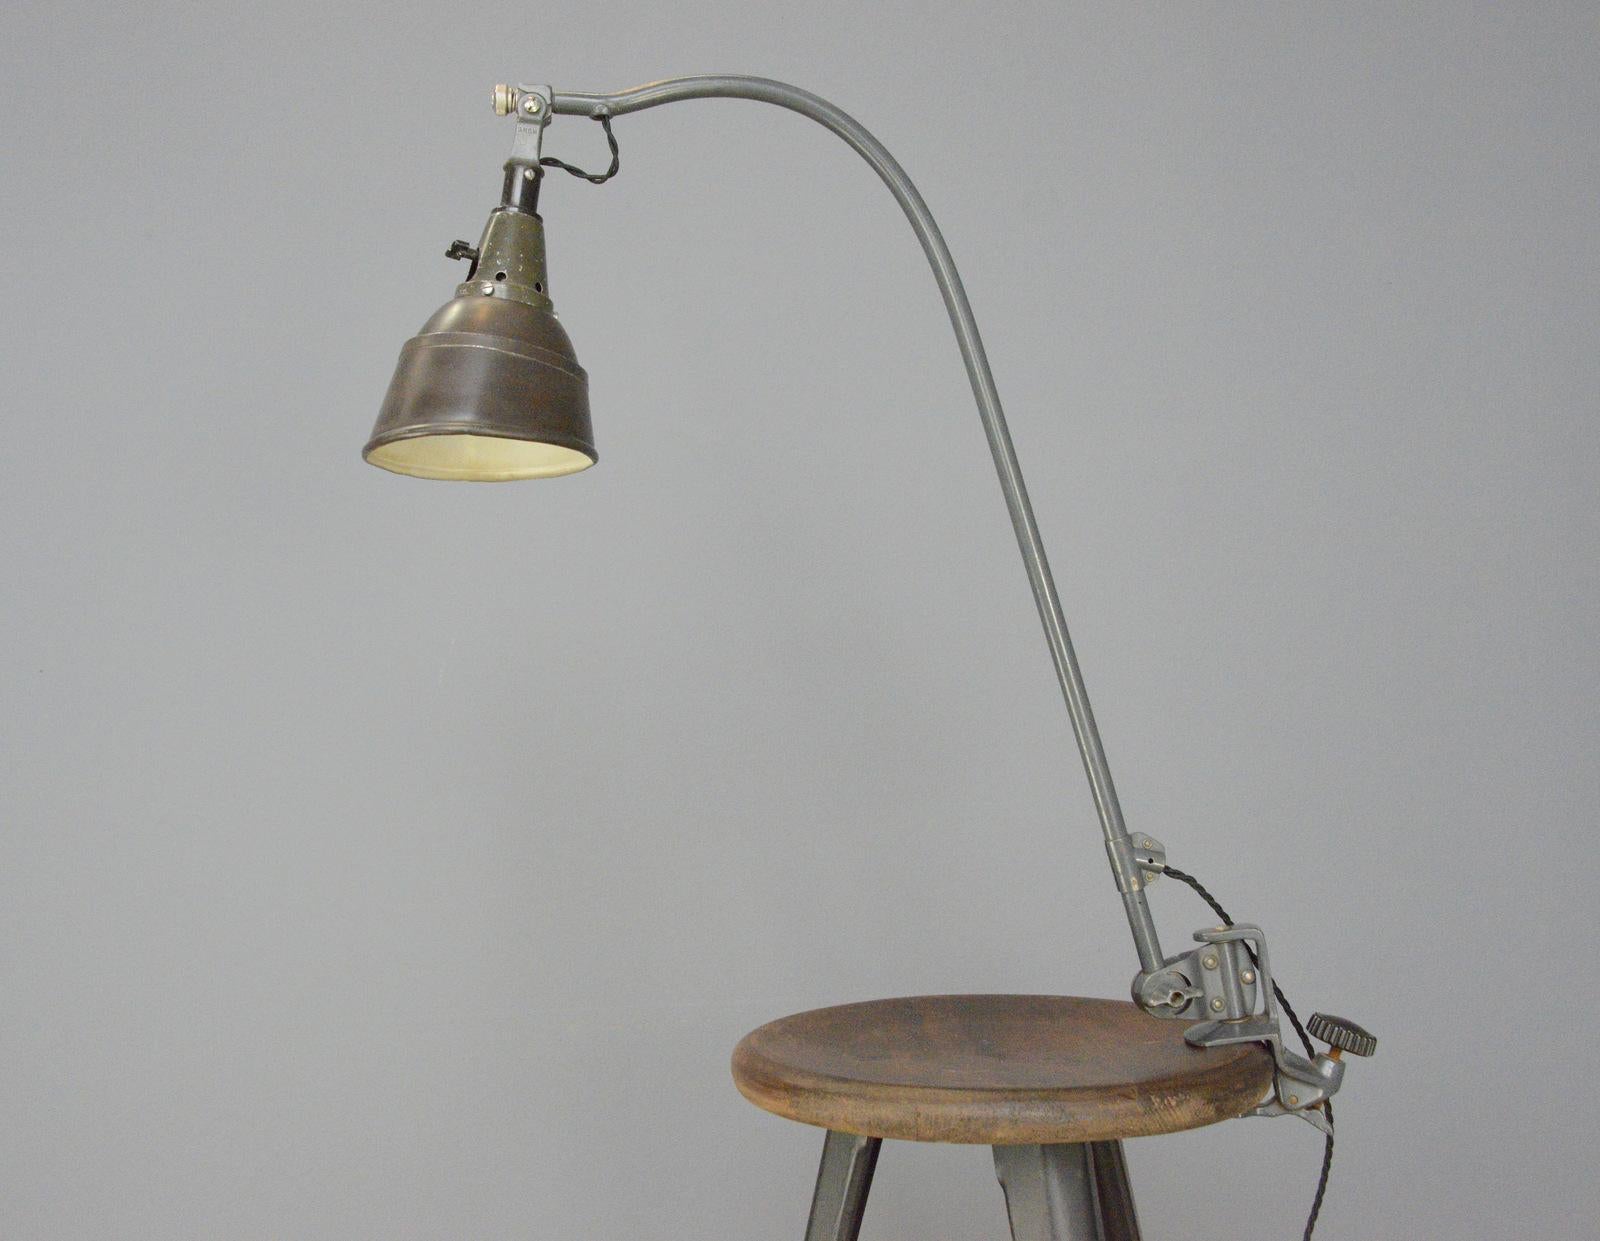 Typ 113 Peitsche Table Lamp By Curt Fischer For Midgard Circa 1940s

- Curved adjustable arm with its original grey paint
- Angled steel shade in original brown paint
- Takes E27 fitting bulbs
- Designed by Curt Fischer
- Typ 113 the